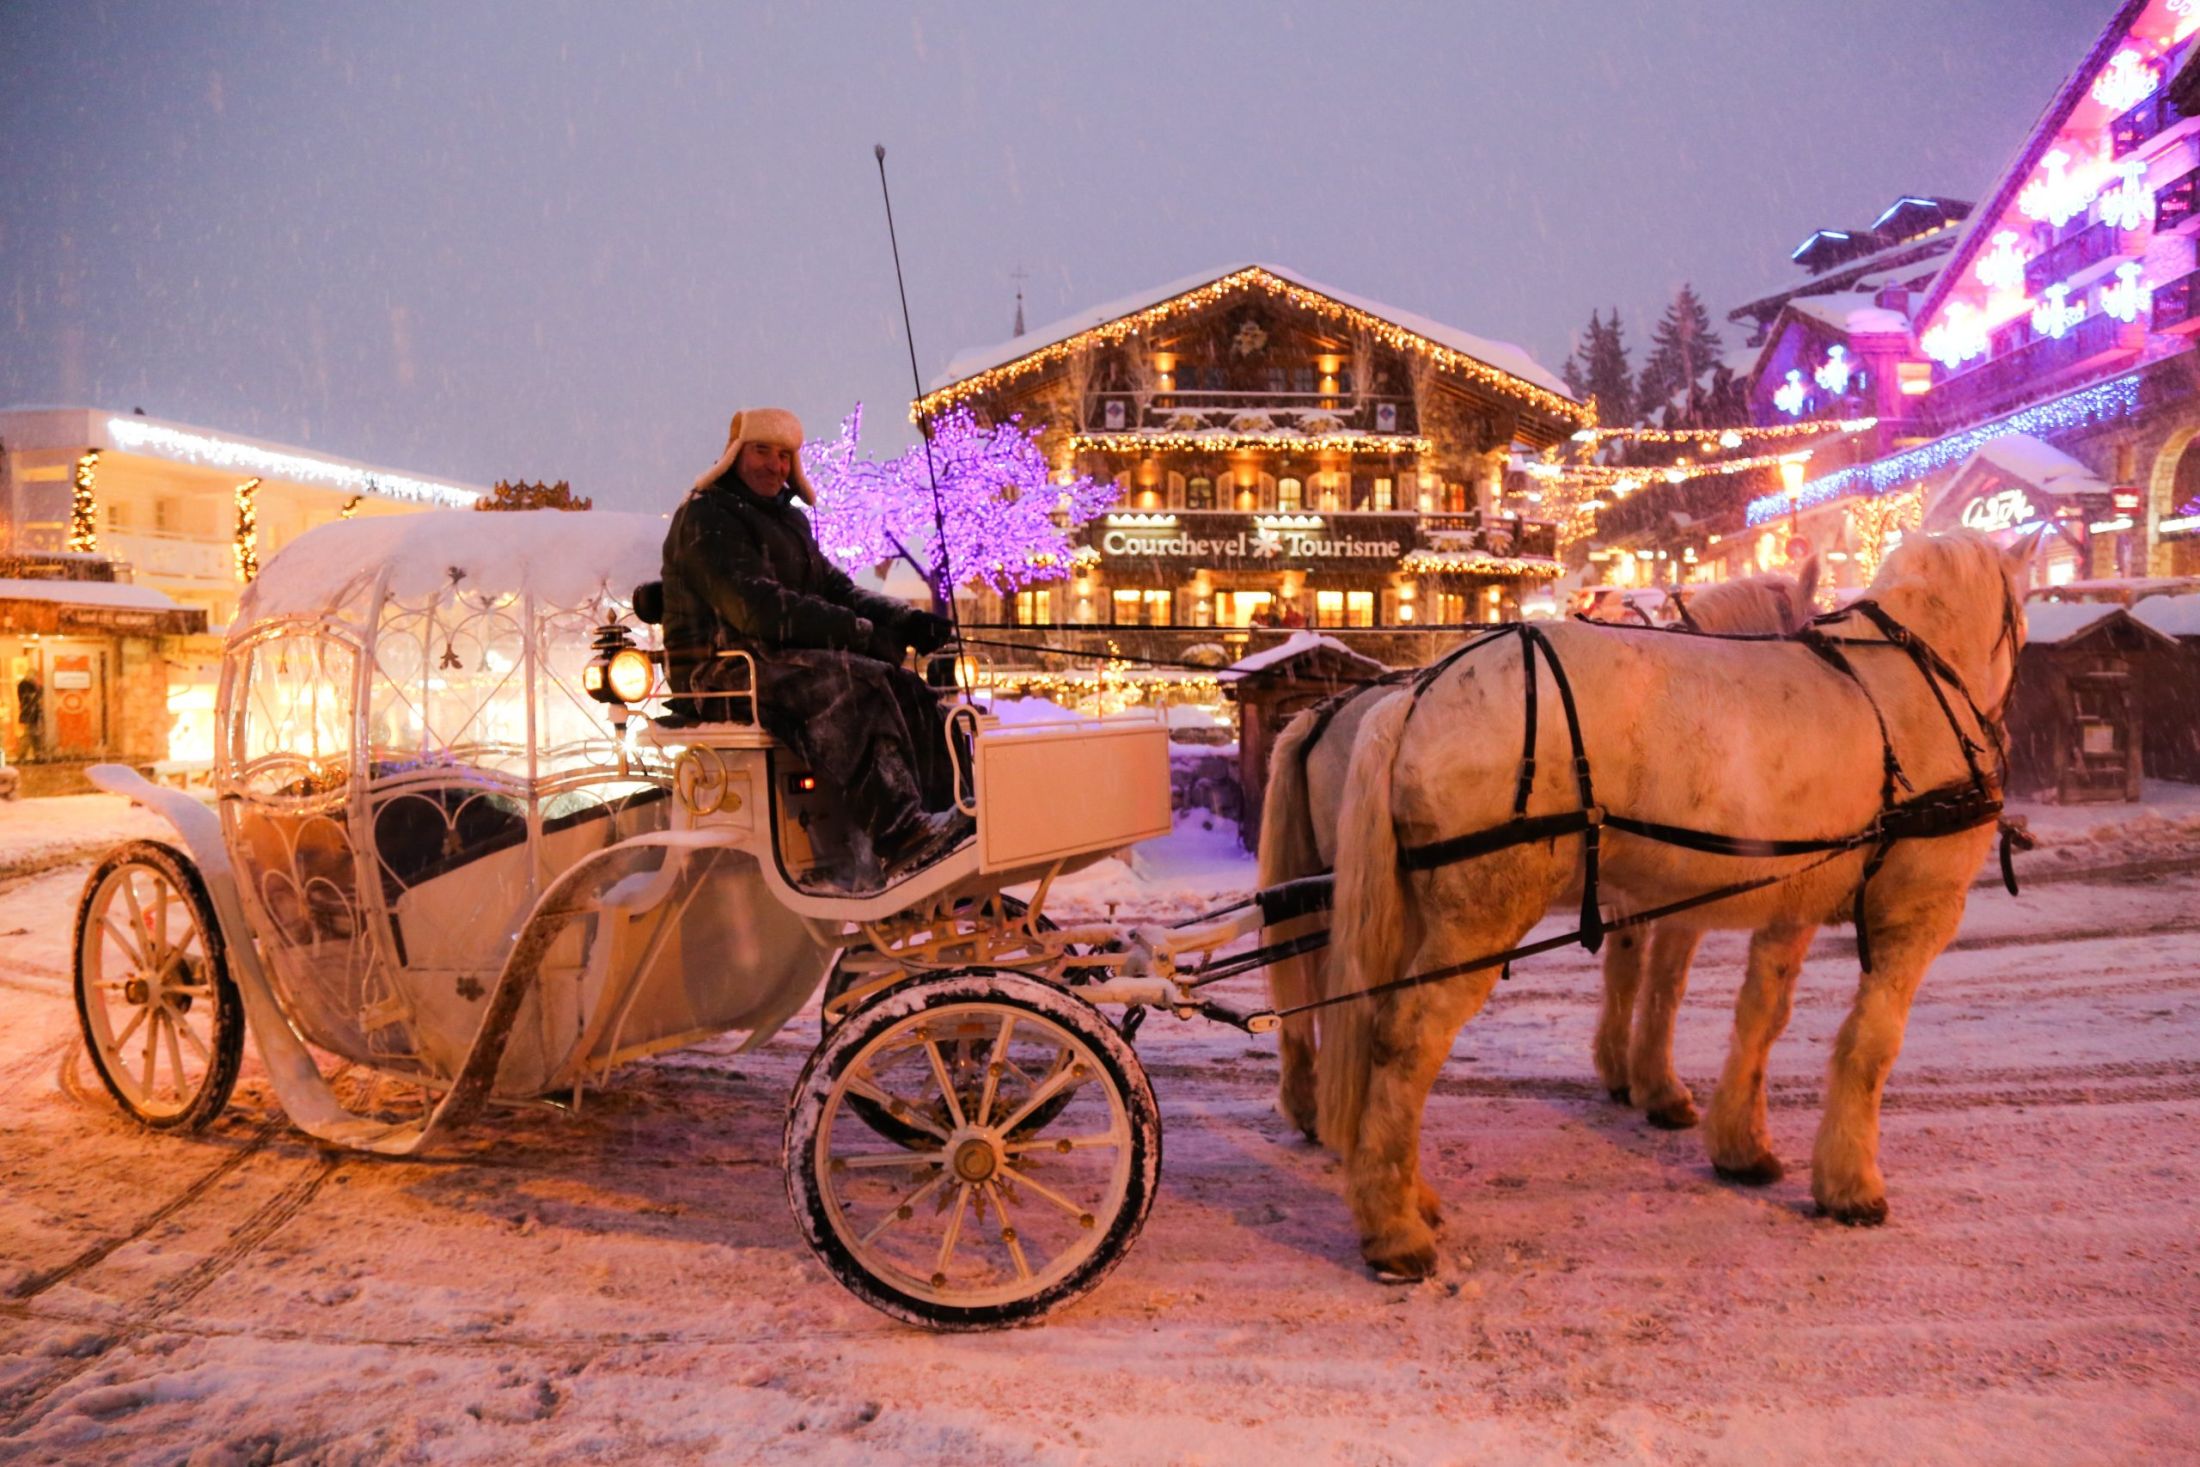 A horse drawn carriage in Courchevel 1850 awaiting guests to experience magic on their luxury ski holiday in Courchevel